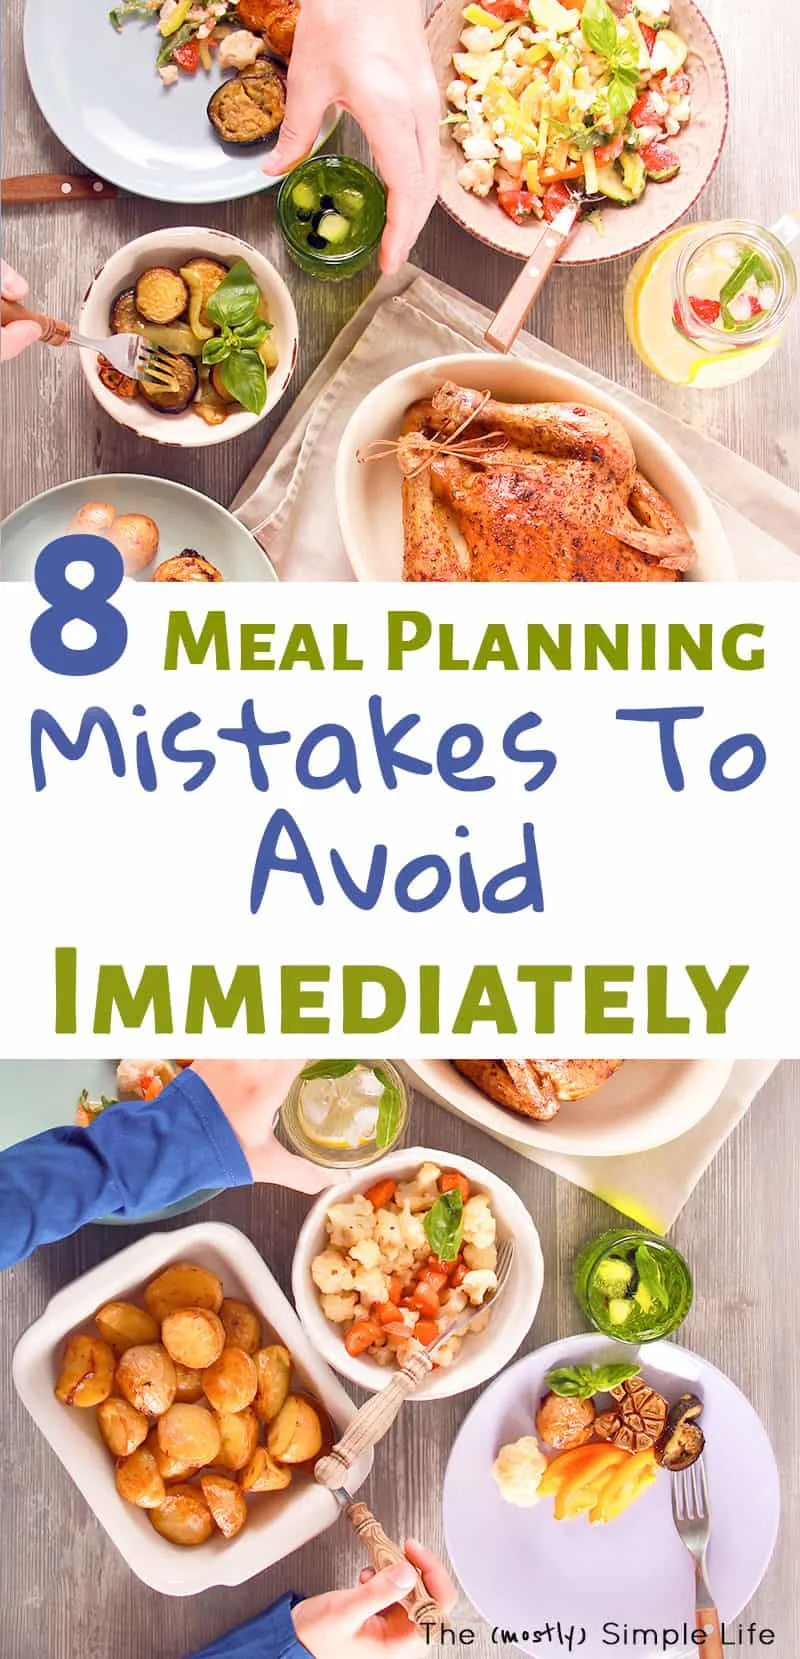 8 Common Meal Planning Mistakes to Avoid